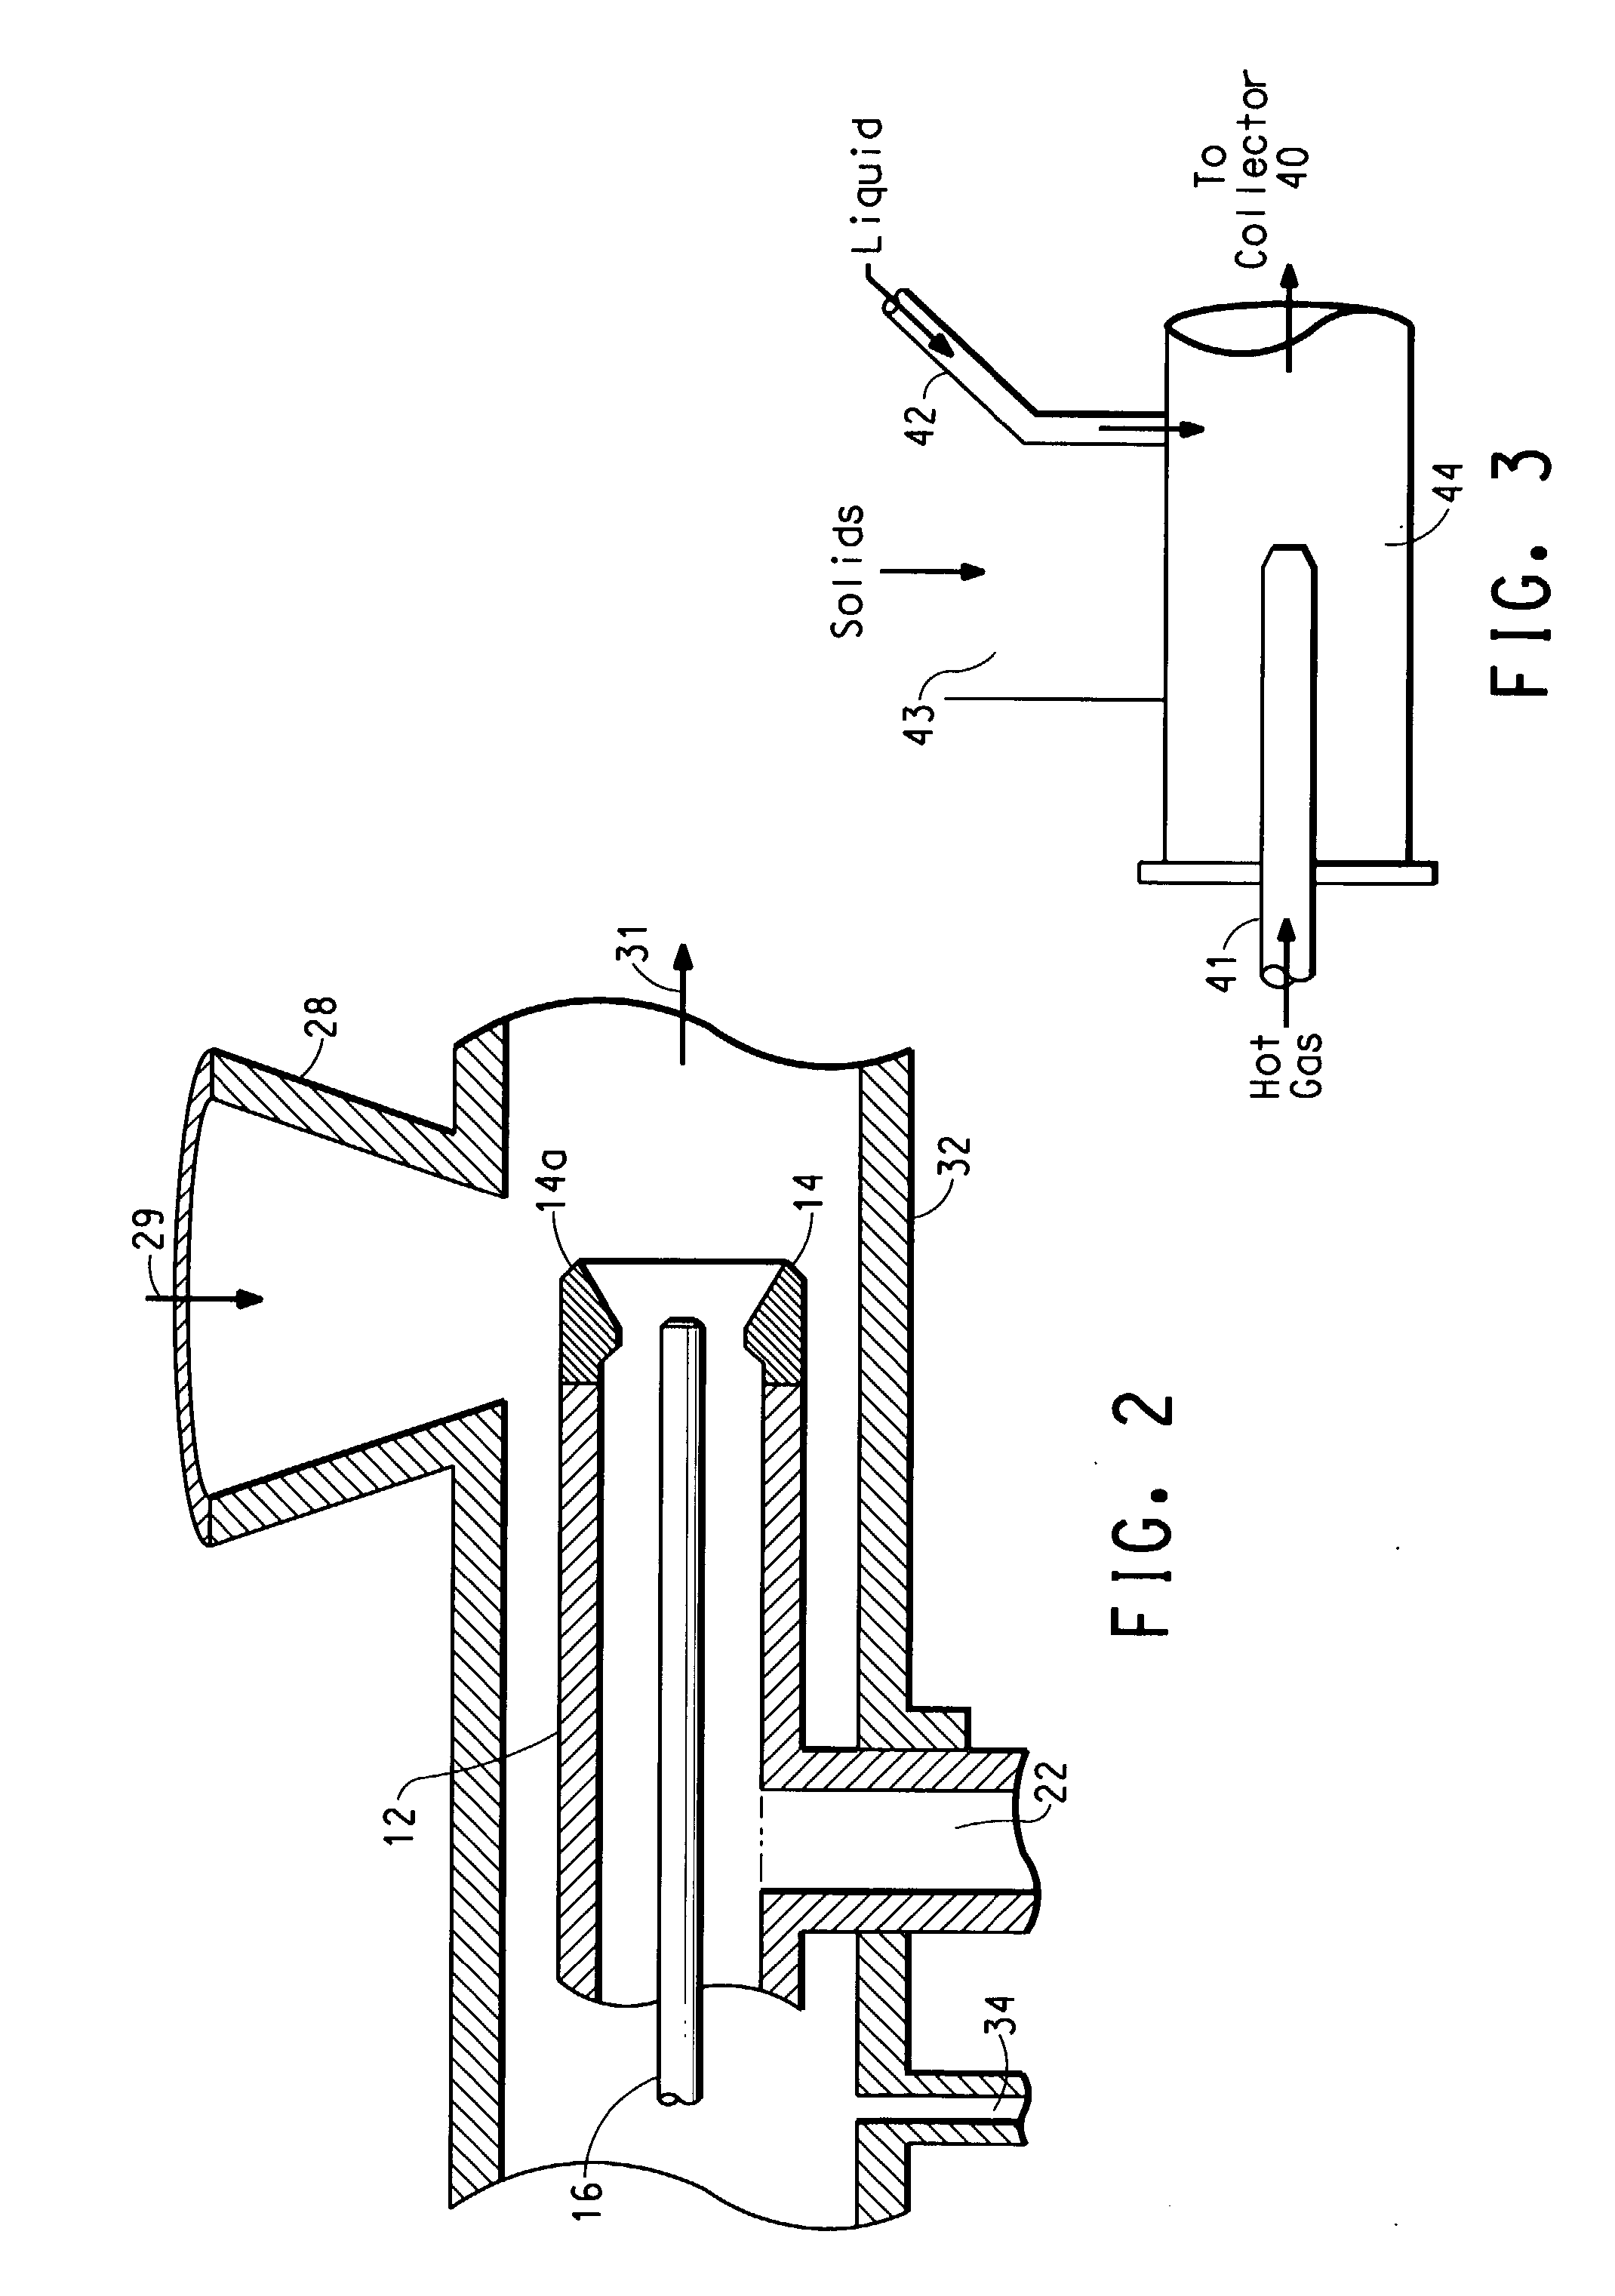 Process for dry coating a food particle or encapsulating a frozen liquid particle